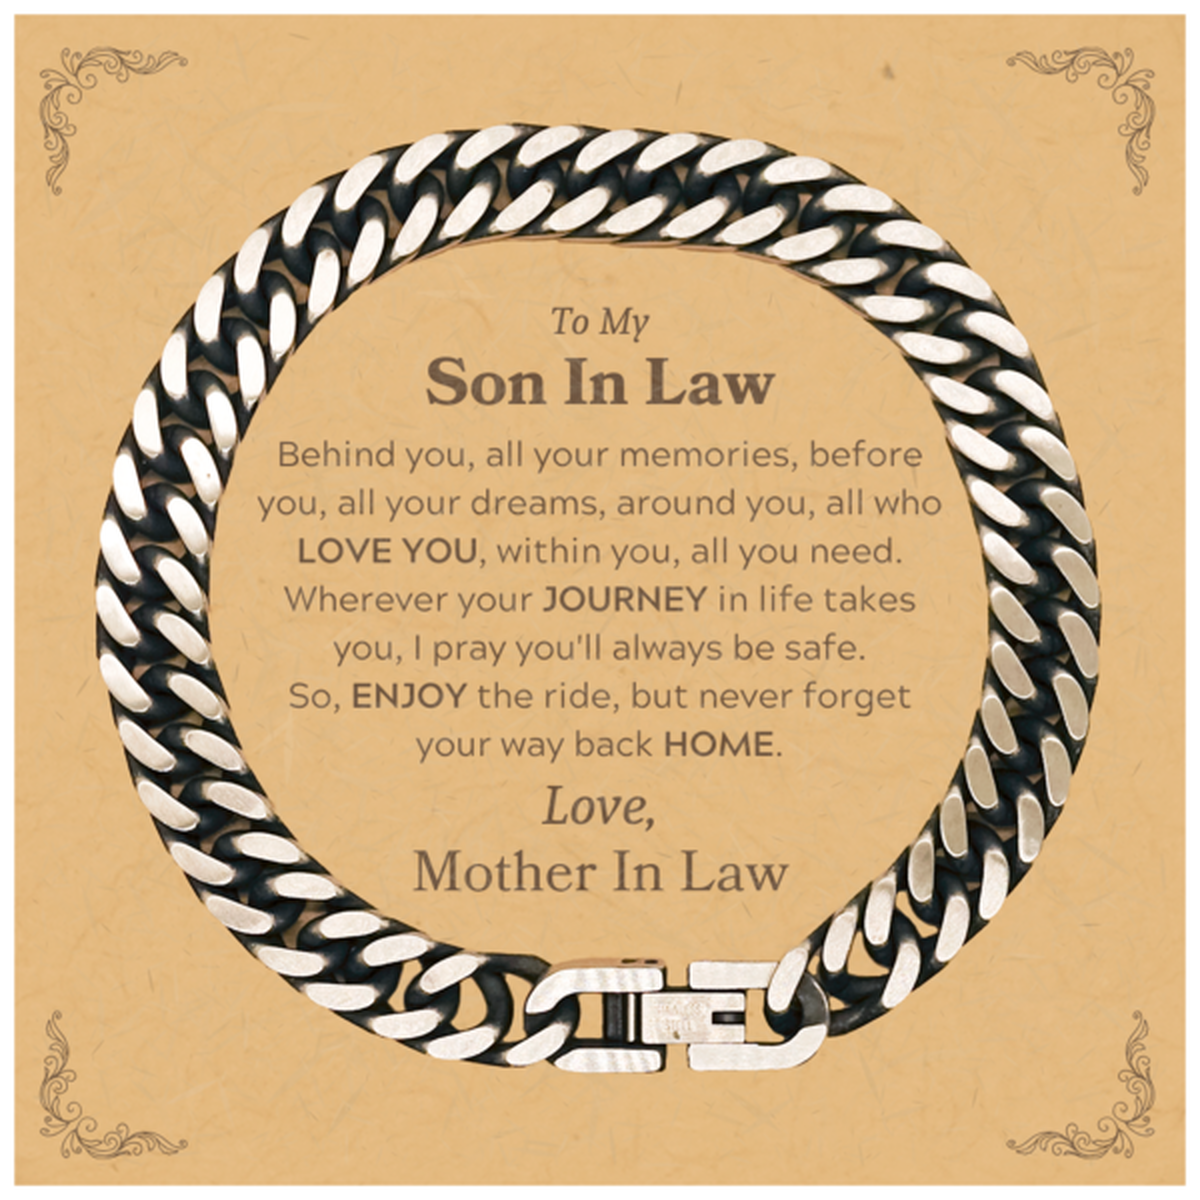 To My Son In Law Graduation Gifts from Mother In Law, Son In Law Cuban Link Chain Bracelet Christmas Birthday Gifts for Son In Law Behind you, all your memories, before you, all your dreams. Love, Mother In Law